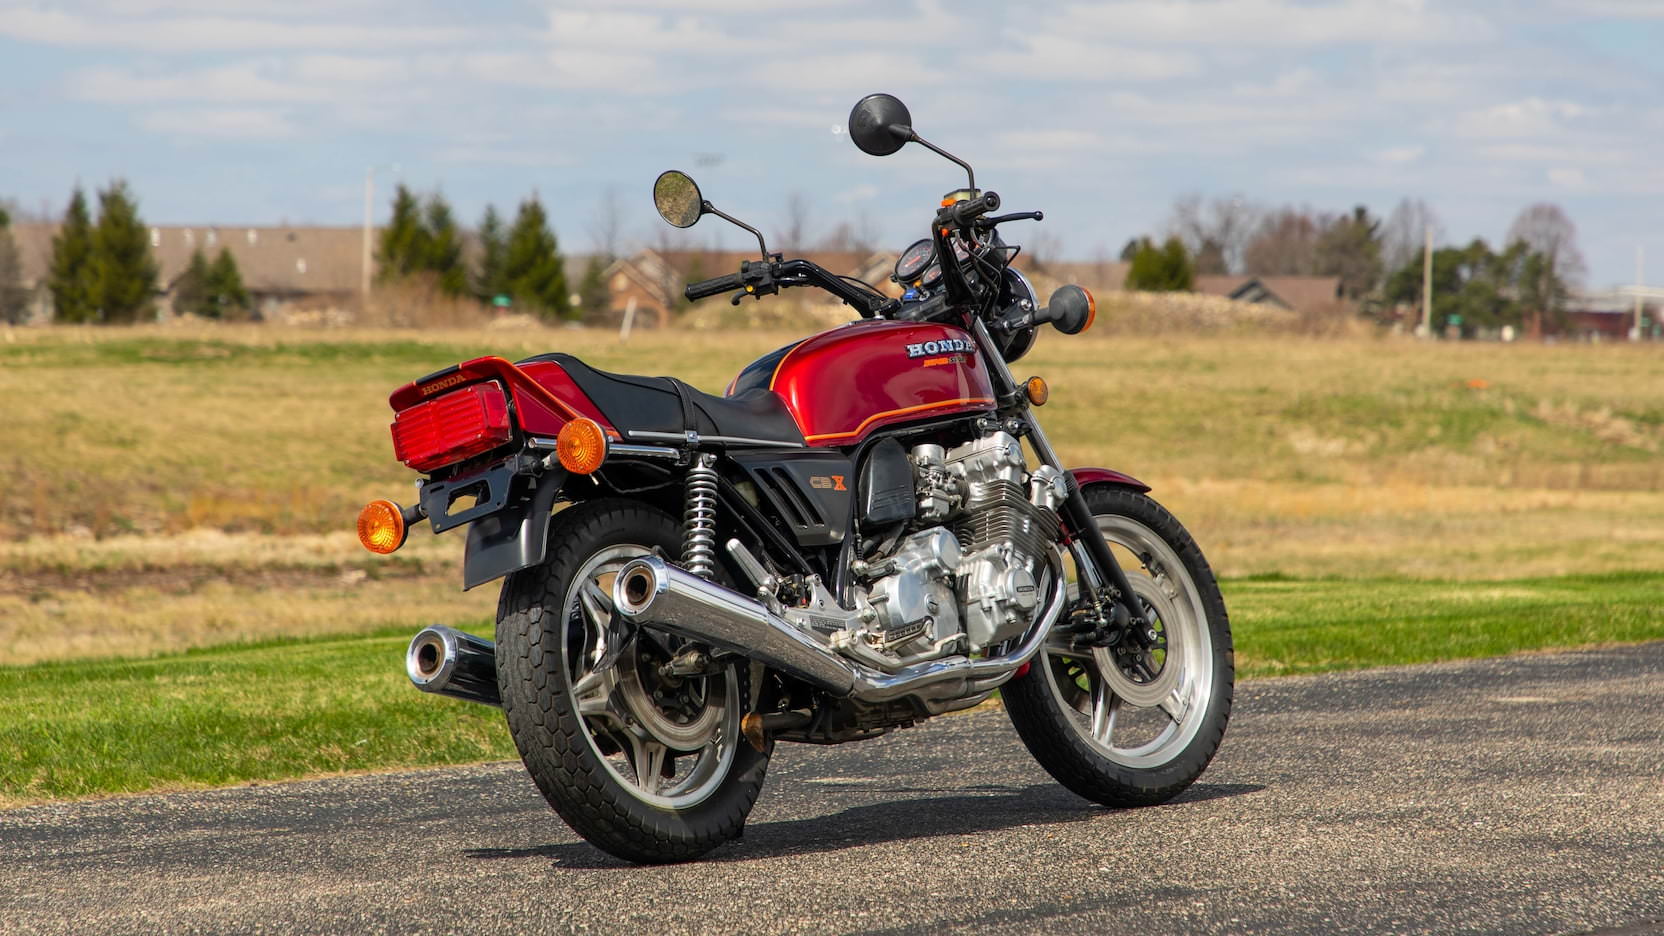 The Honda Cbx An Unusual Japanese Inline 6 Cylinder Motorcycle